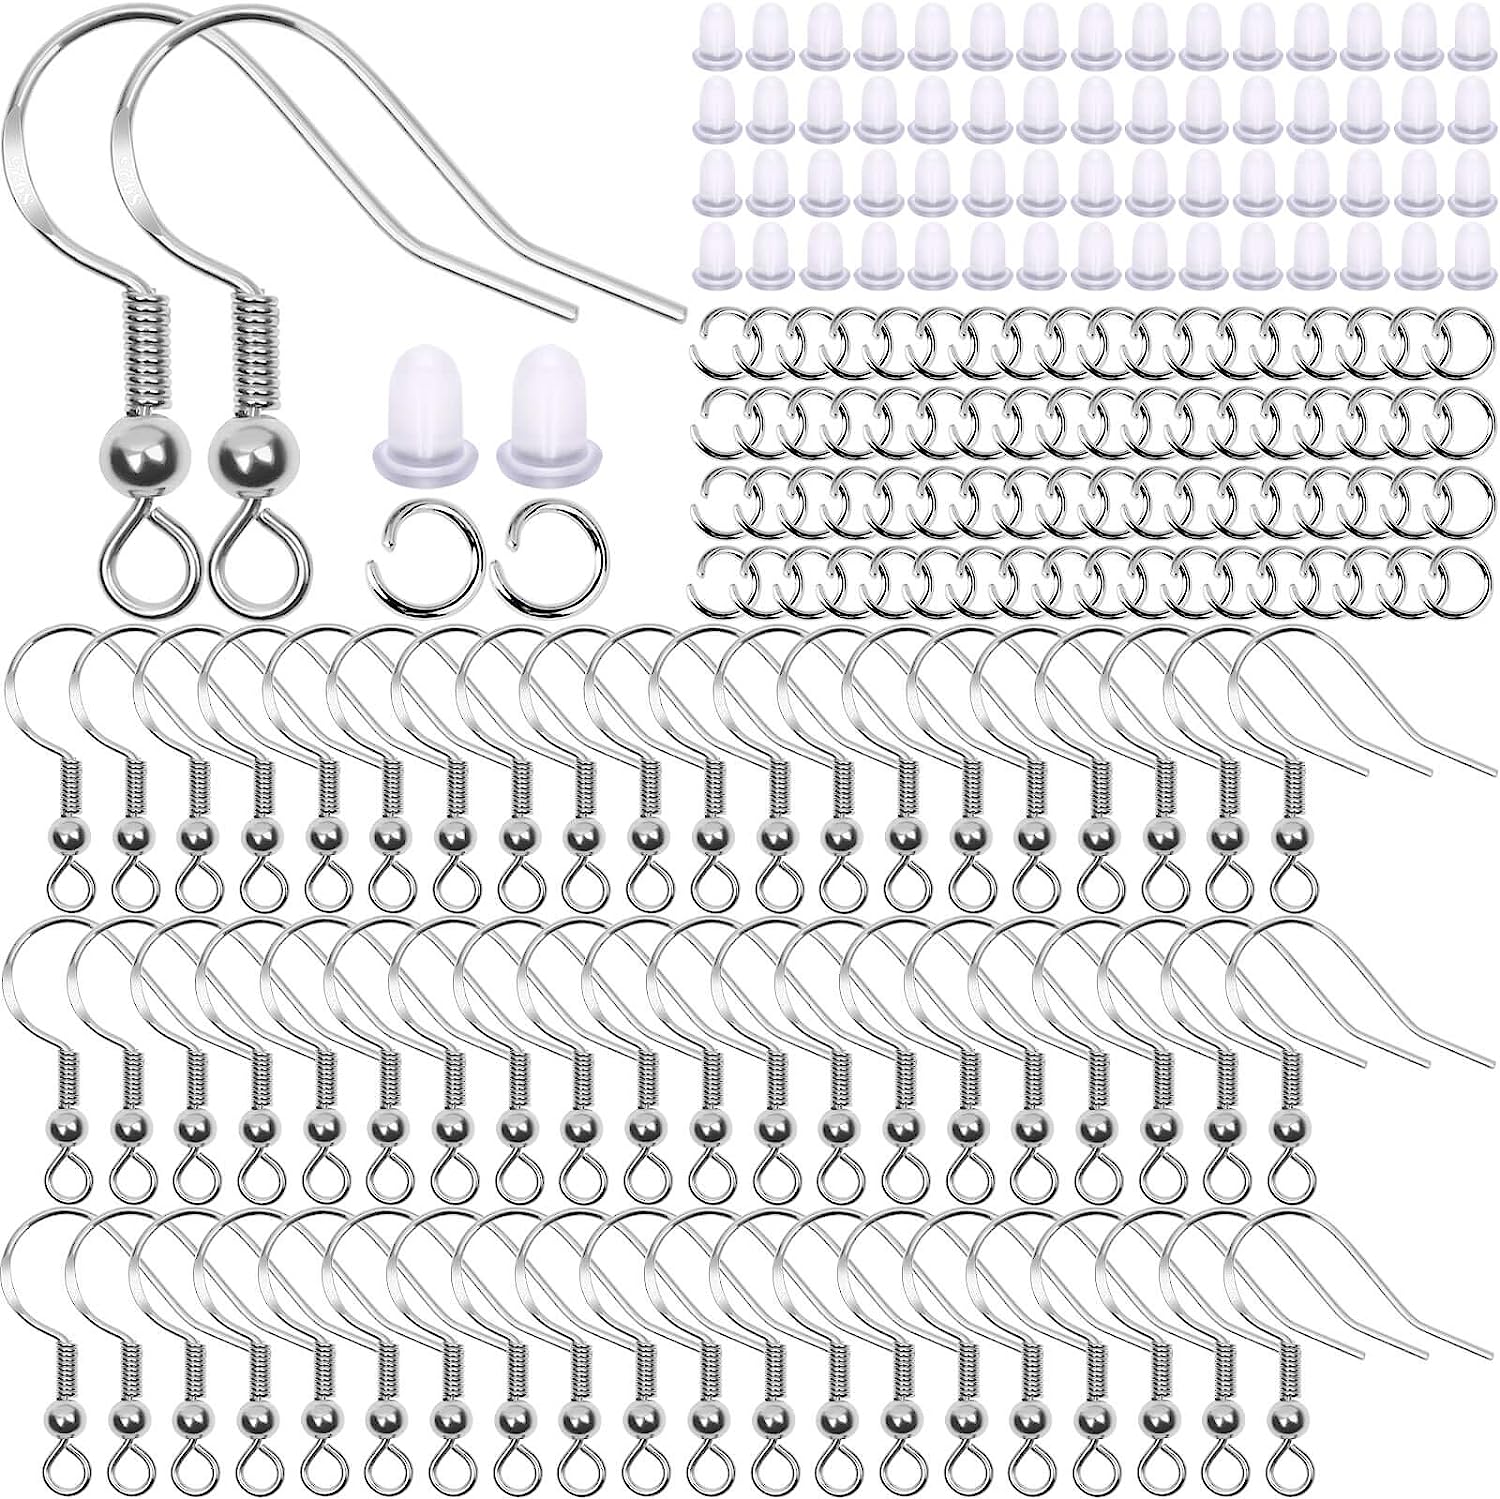 150pcs 925 Silver Plated Earring Hooks, Ear Wires Fish Hooks Earring Making  Supplies With Jump Rings And Clear Silicone Backs For Sensitive Ears